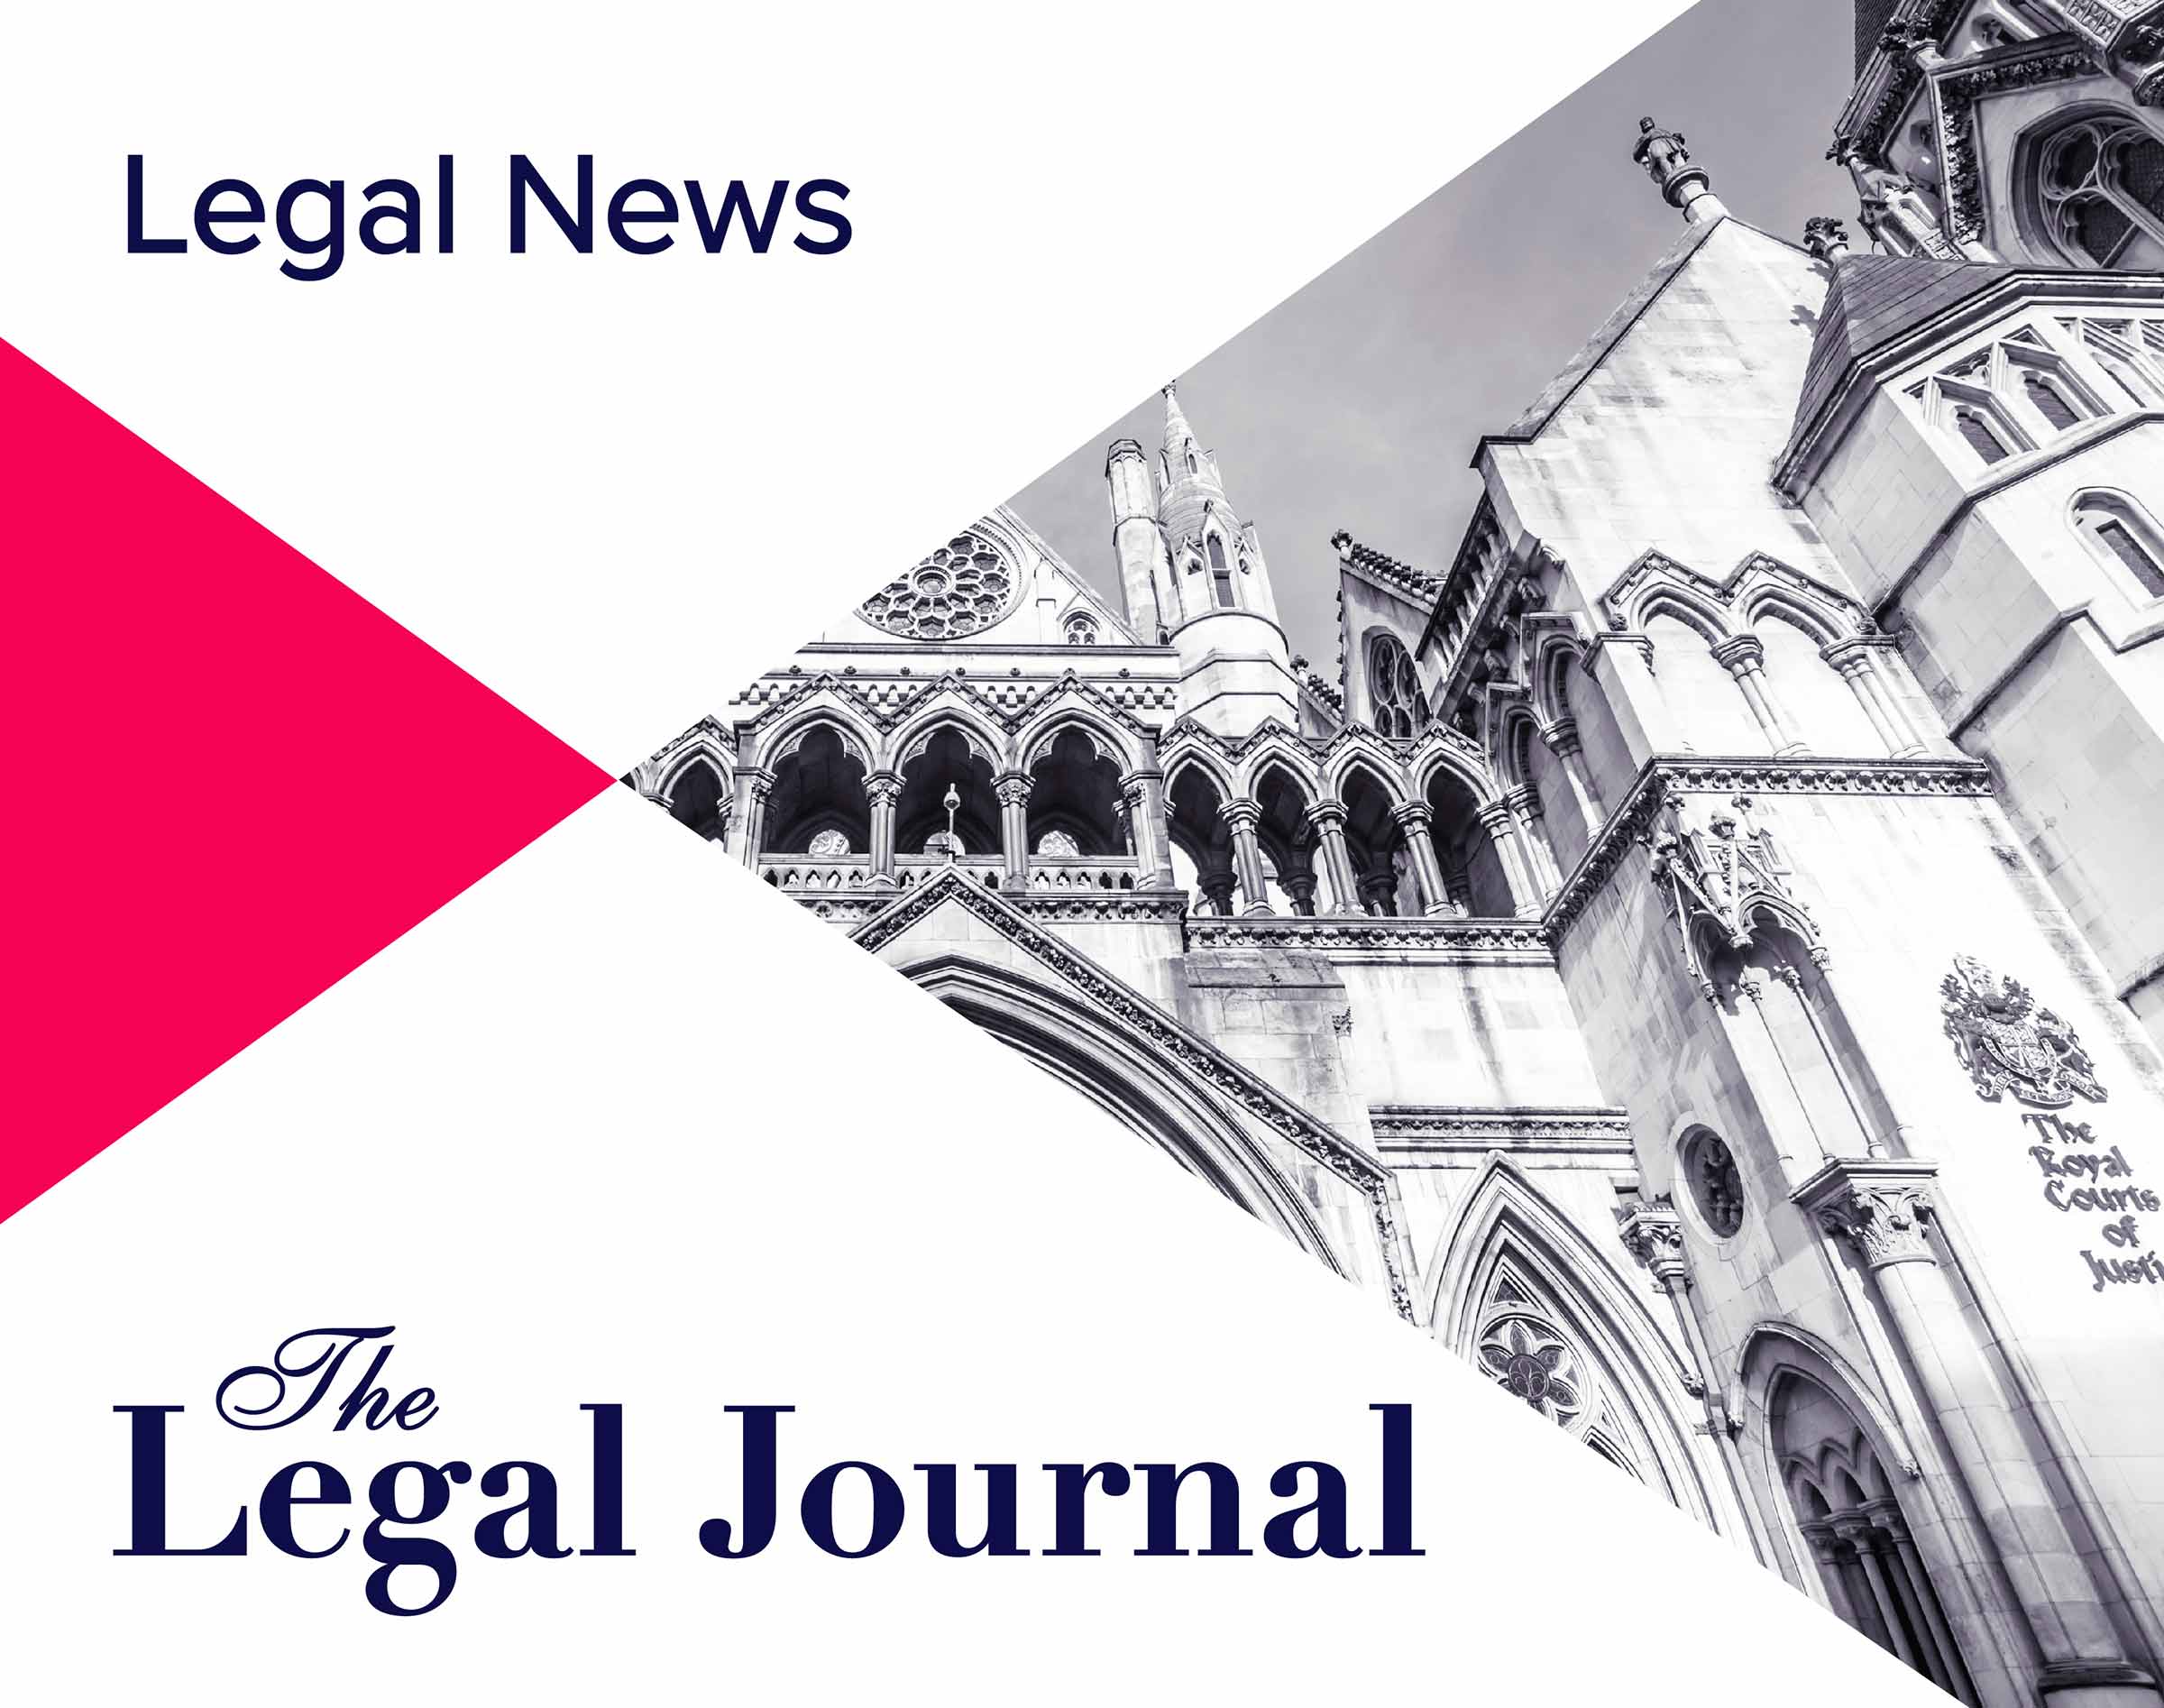 The Legal Journal panel